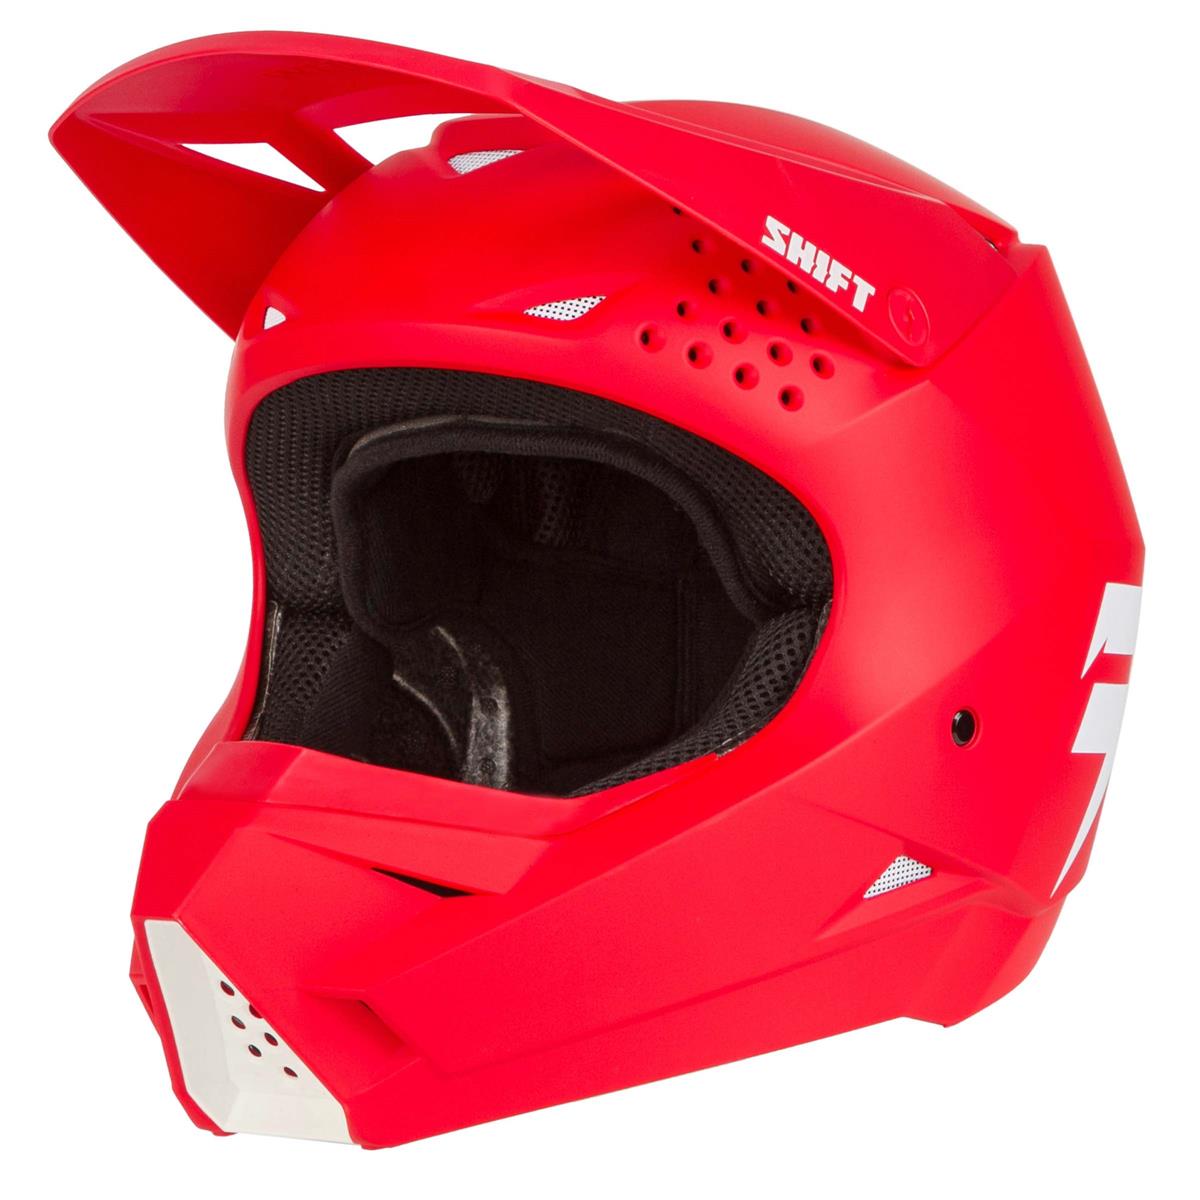 Shift Casque MX Whit3 Label Red